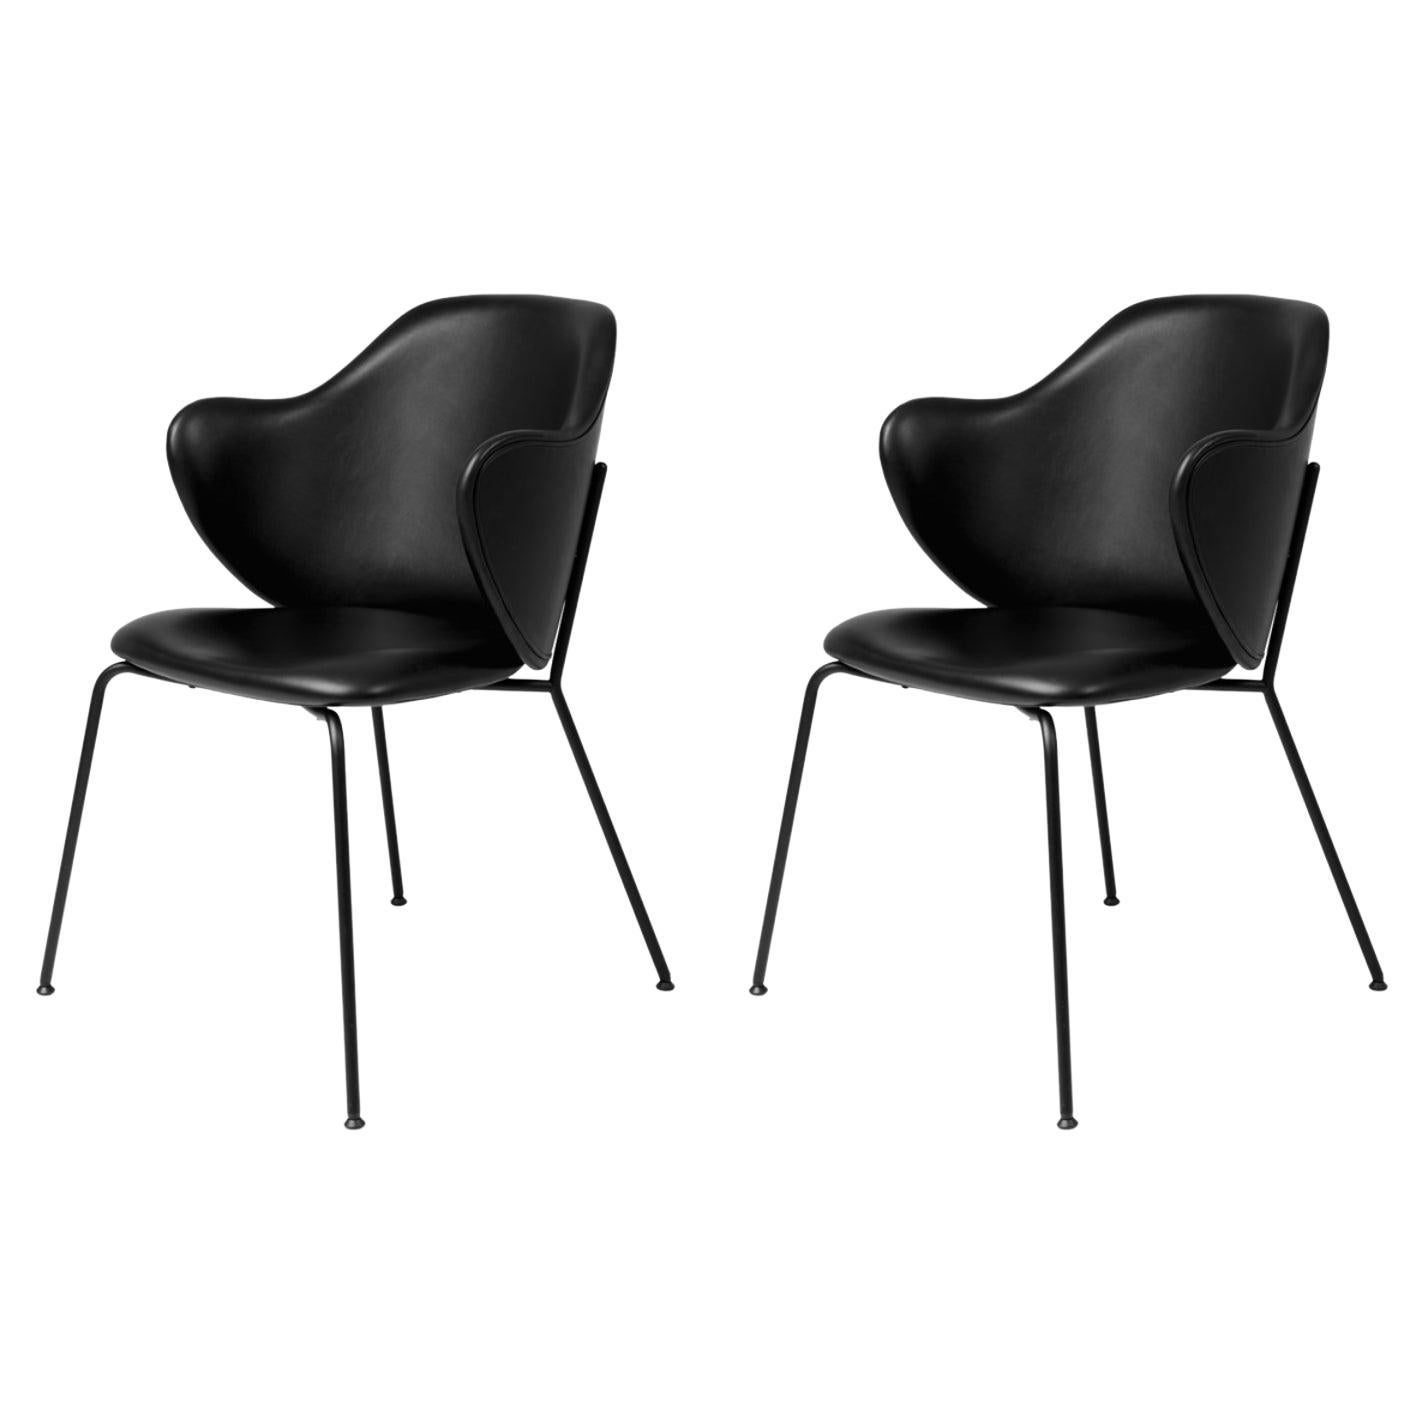 Set of 2 Black Leather Lassen Chairs by Lassen For Sale